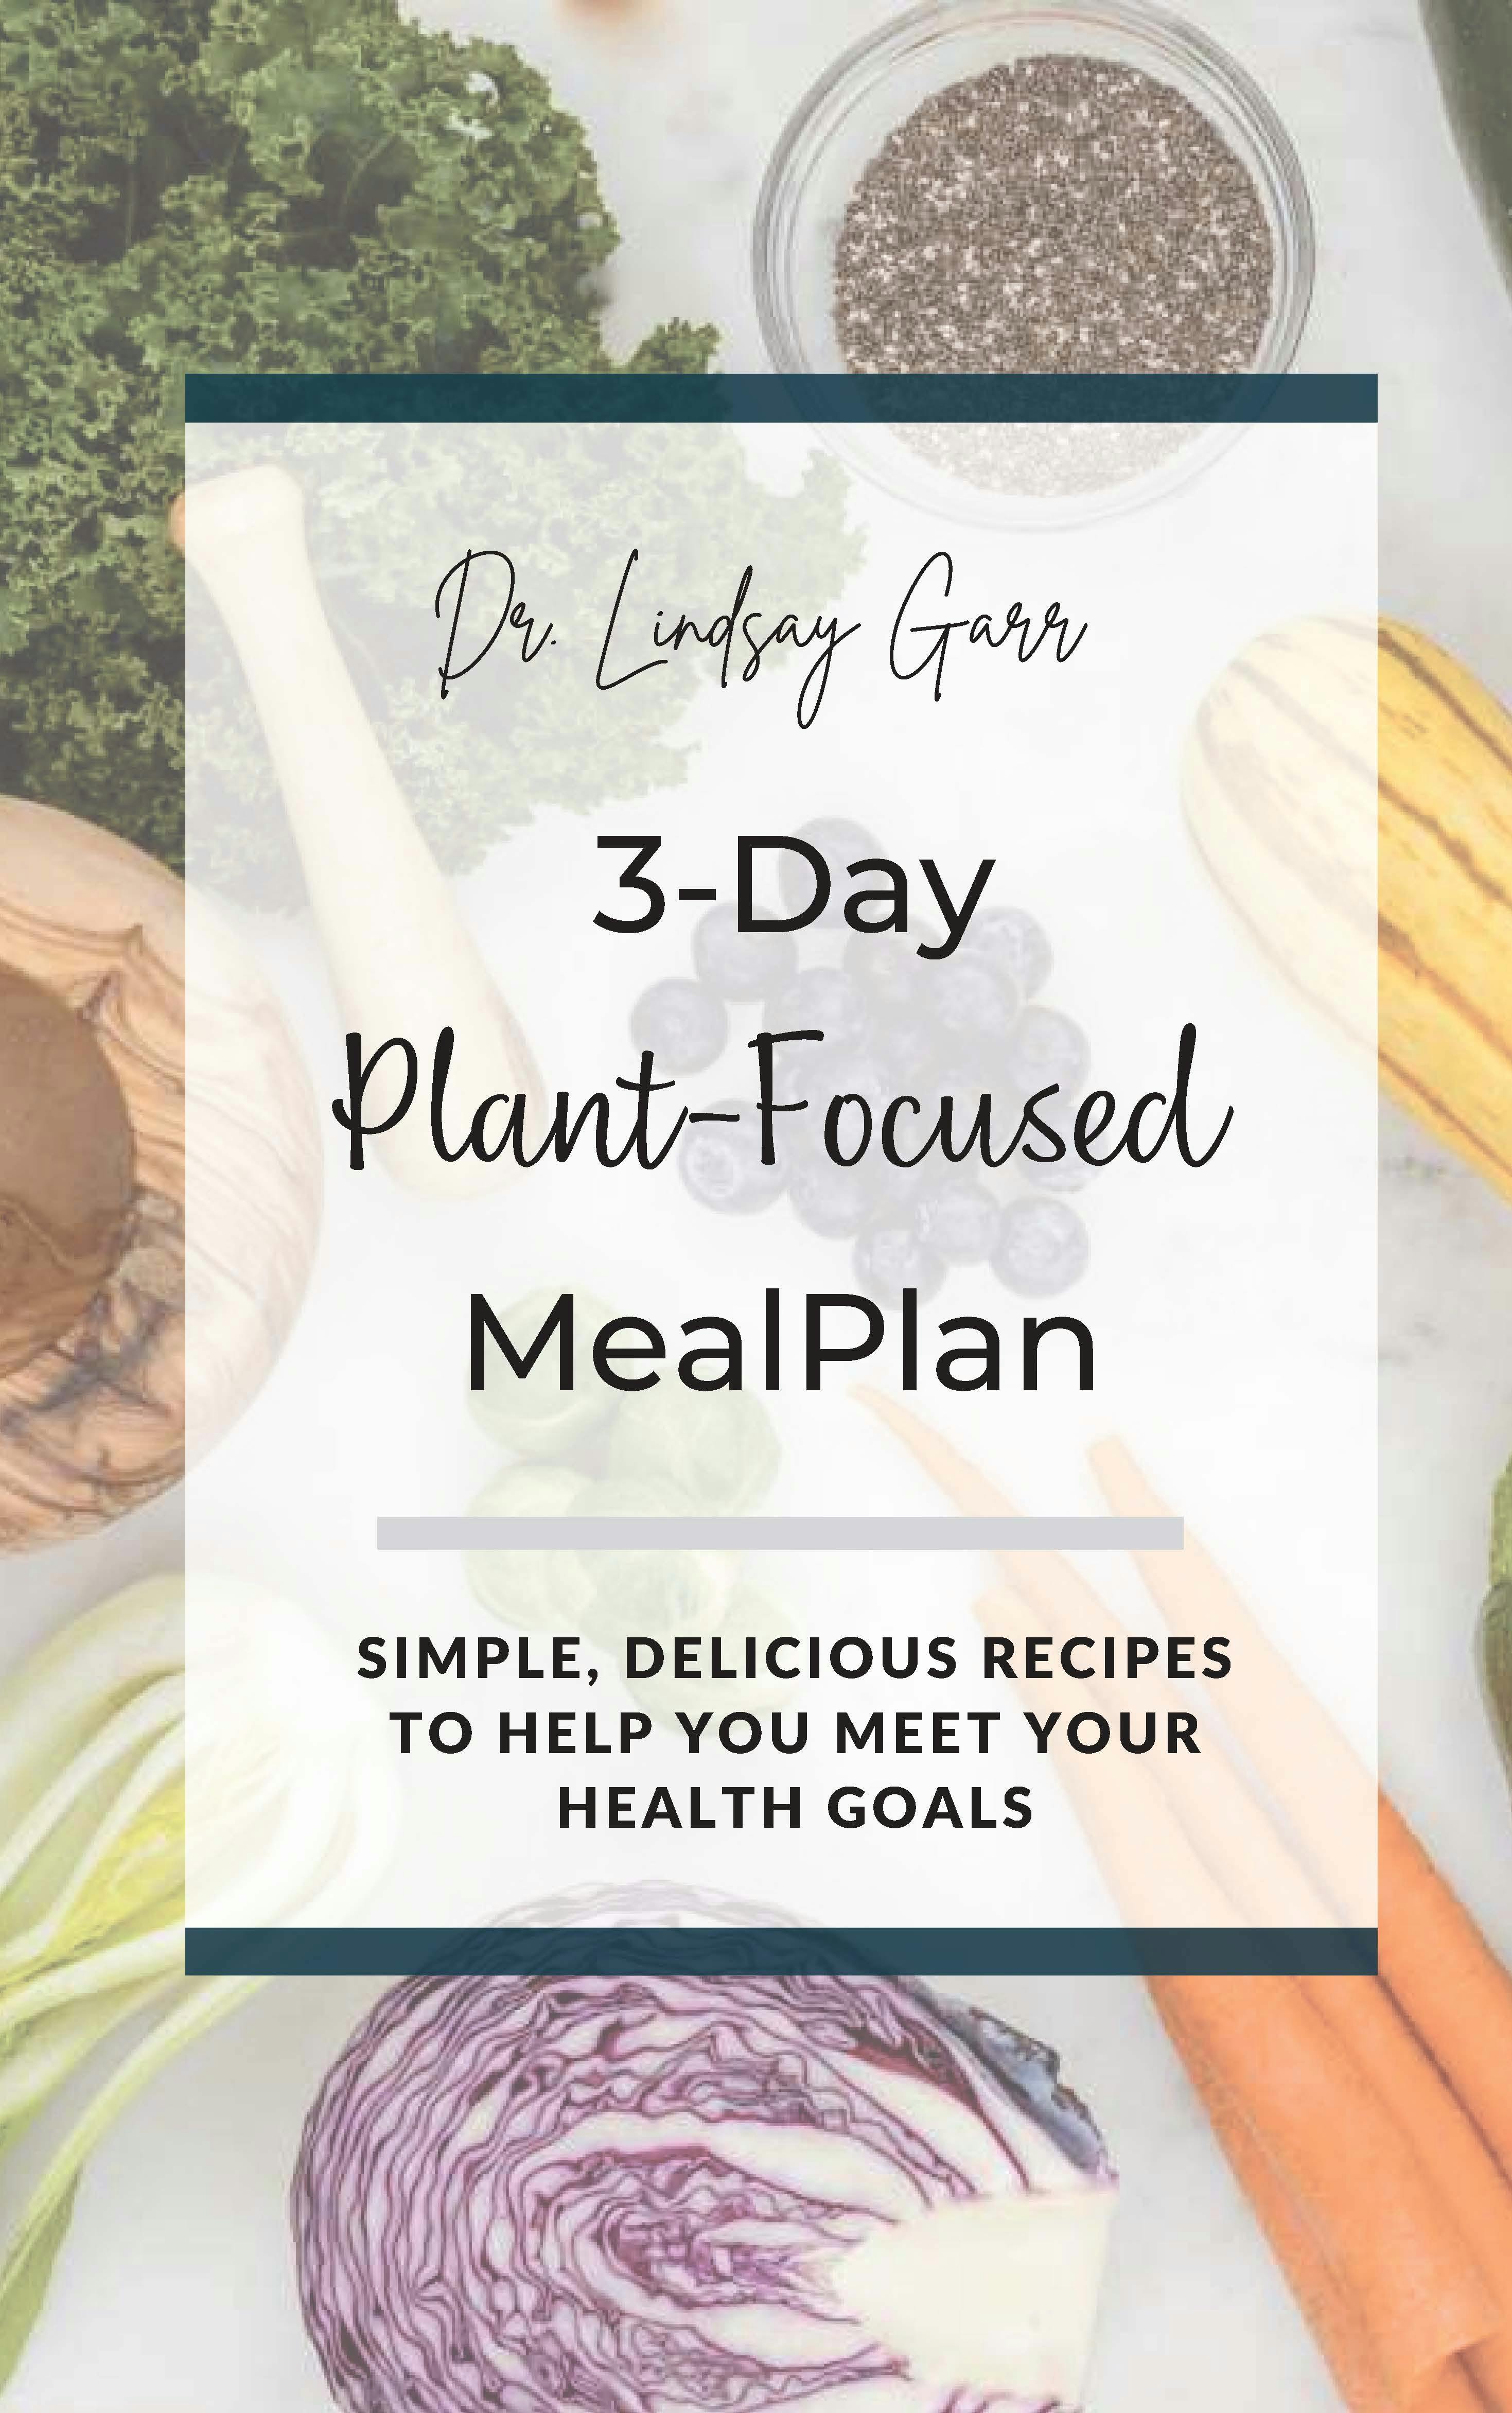 3-Day Plant-Focused Meal Plan Recipe ebook